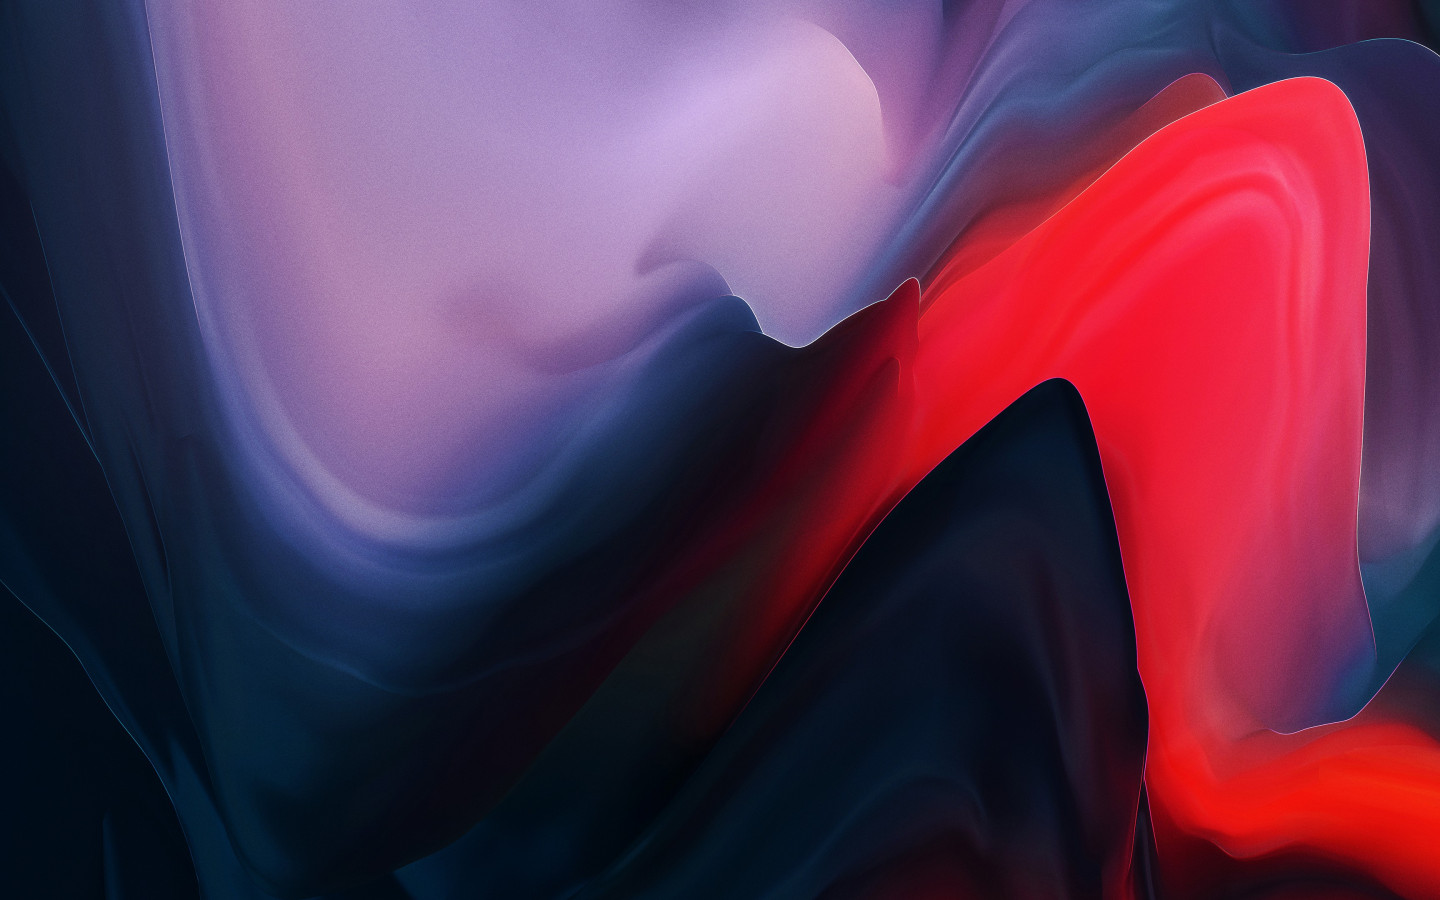 The Abstract from OnePlus 6T wallpaper 1440x900